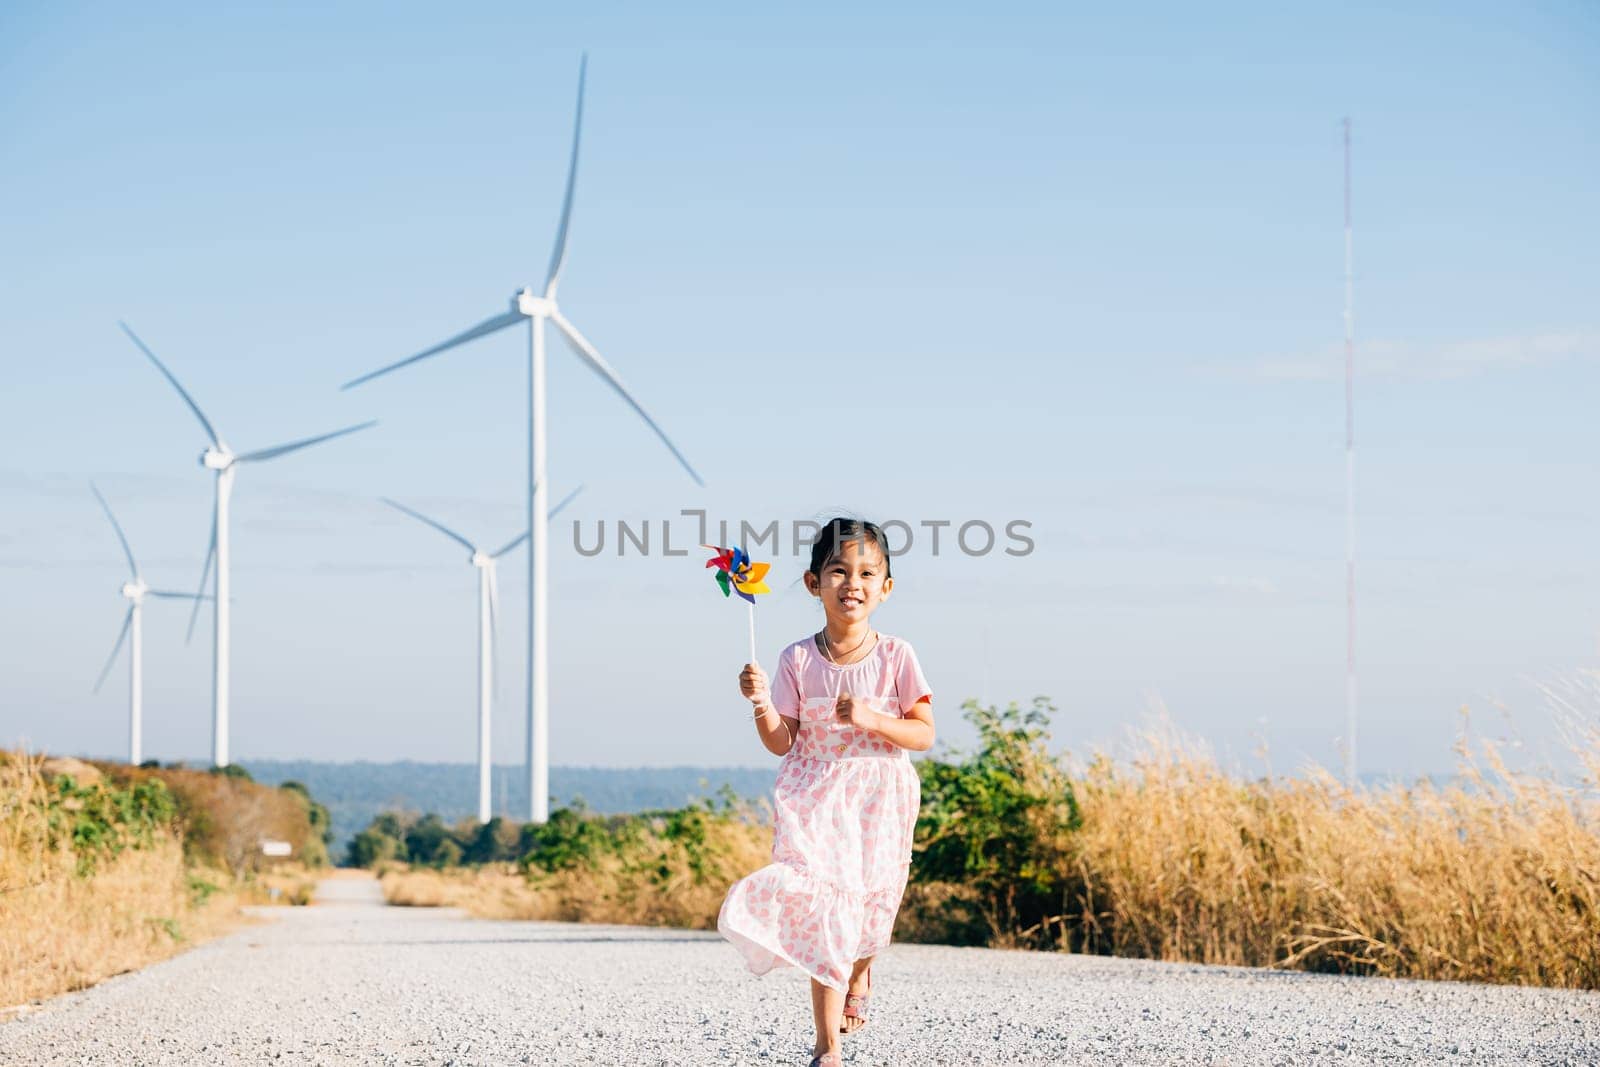 A smiling daughter plays with pinwheels near windmills enjoying playful wind energy education. Clean electricity's beauty illustrated in a joyful childhood setting under a sunny sky.